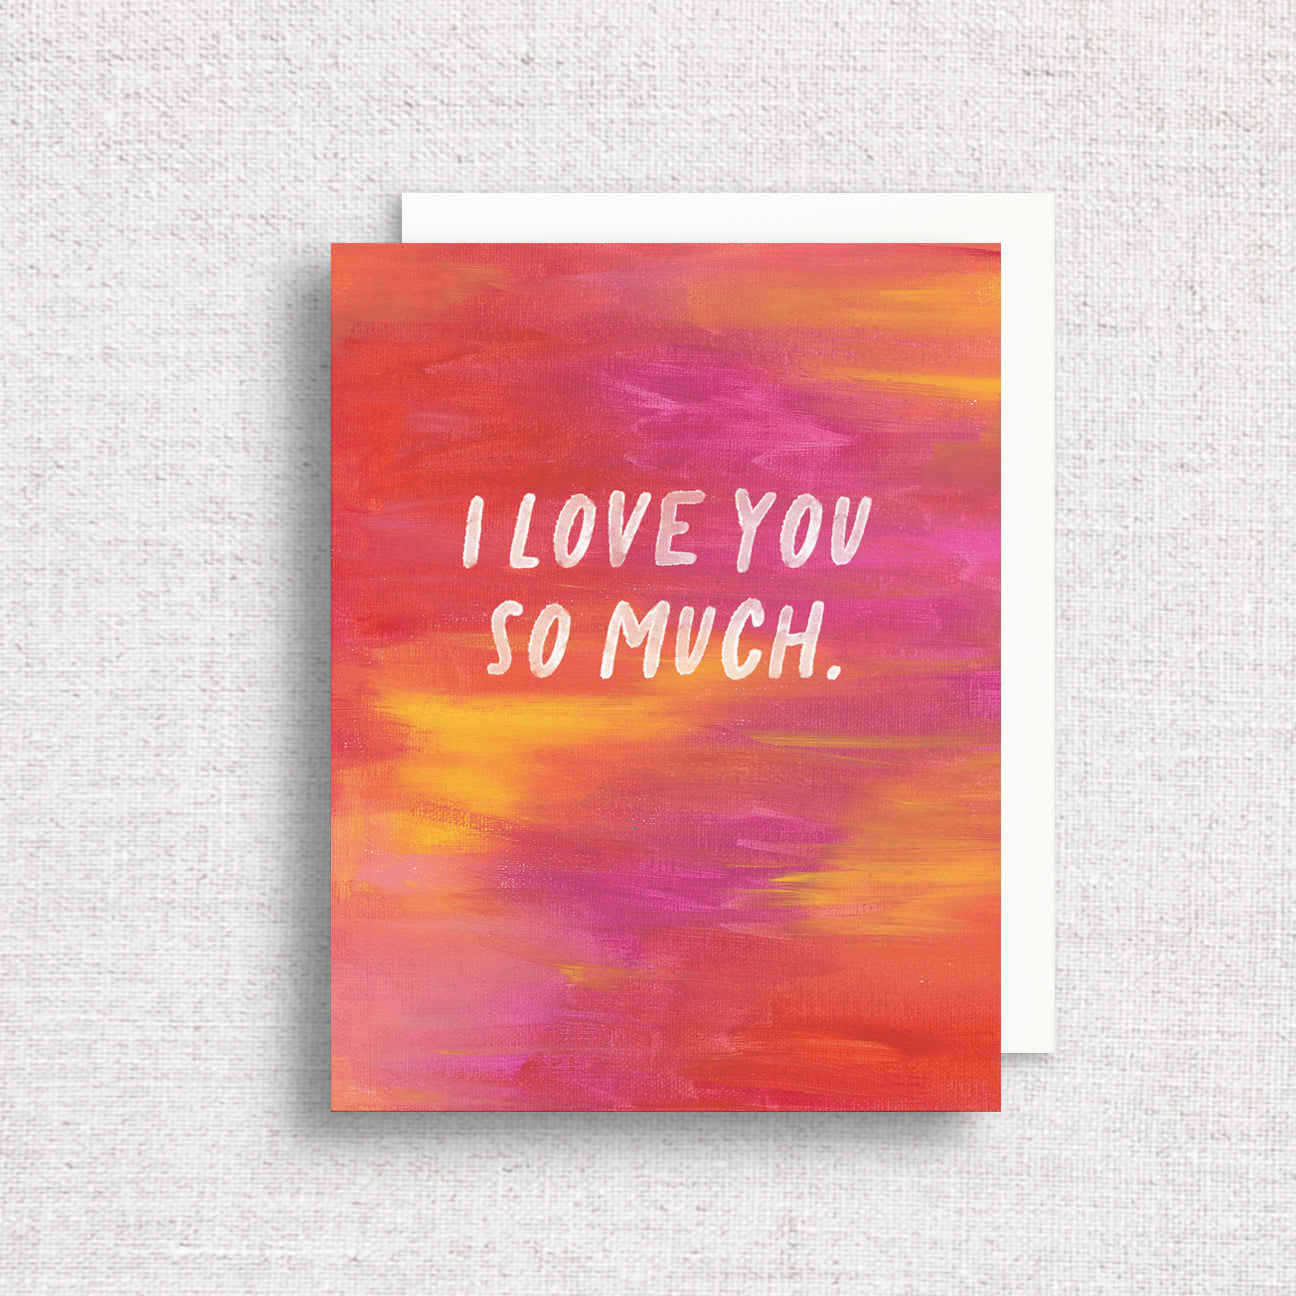 I Love You So Much Greeting Card by Gert & Co